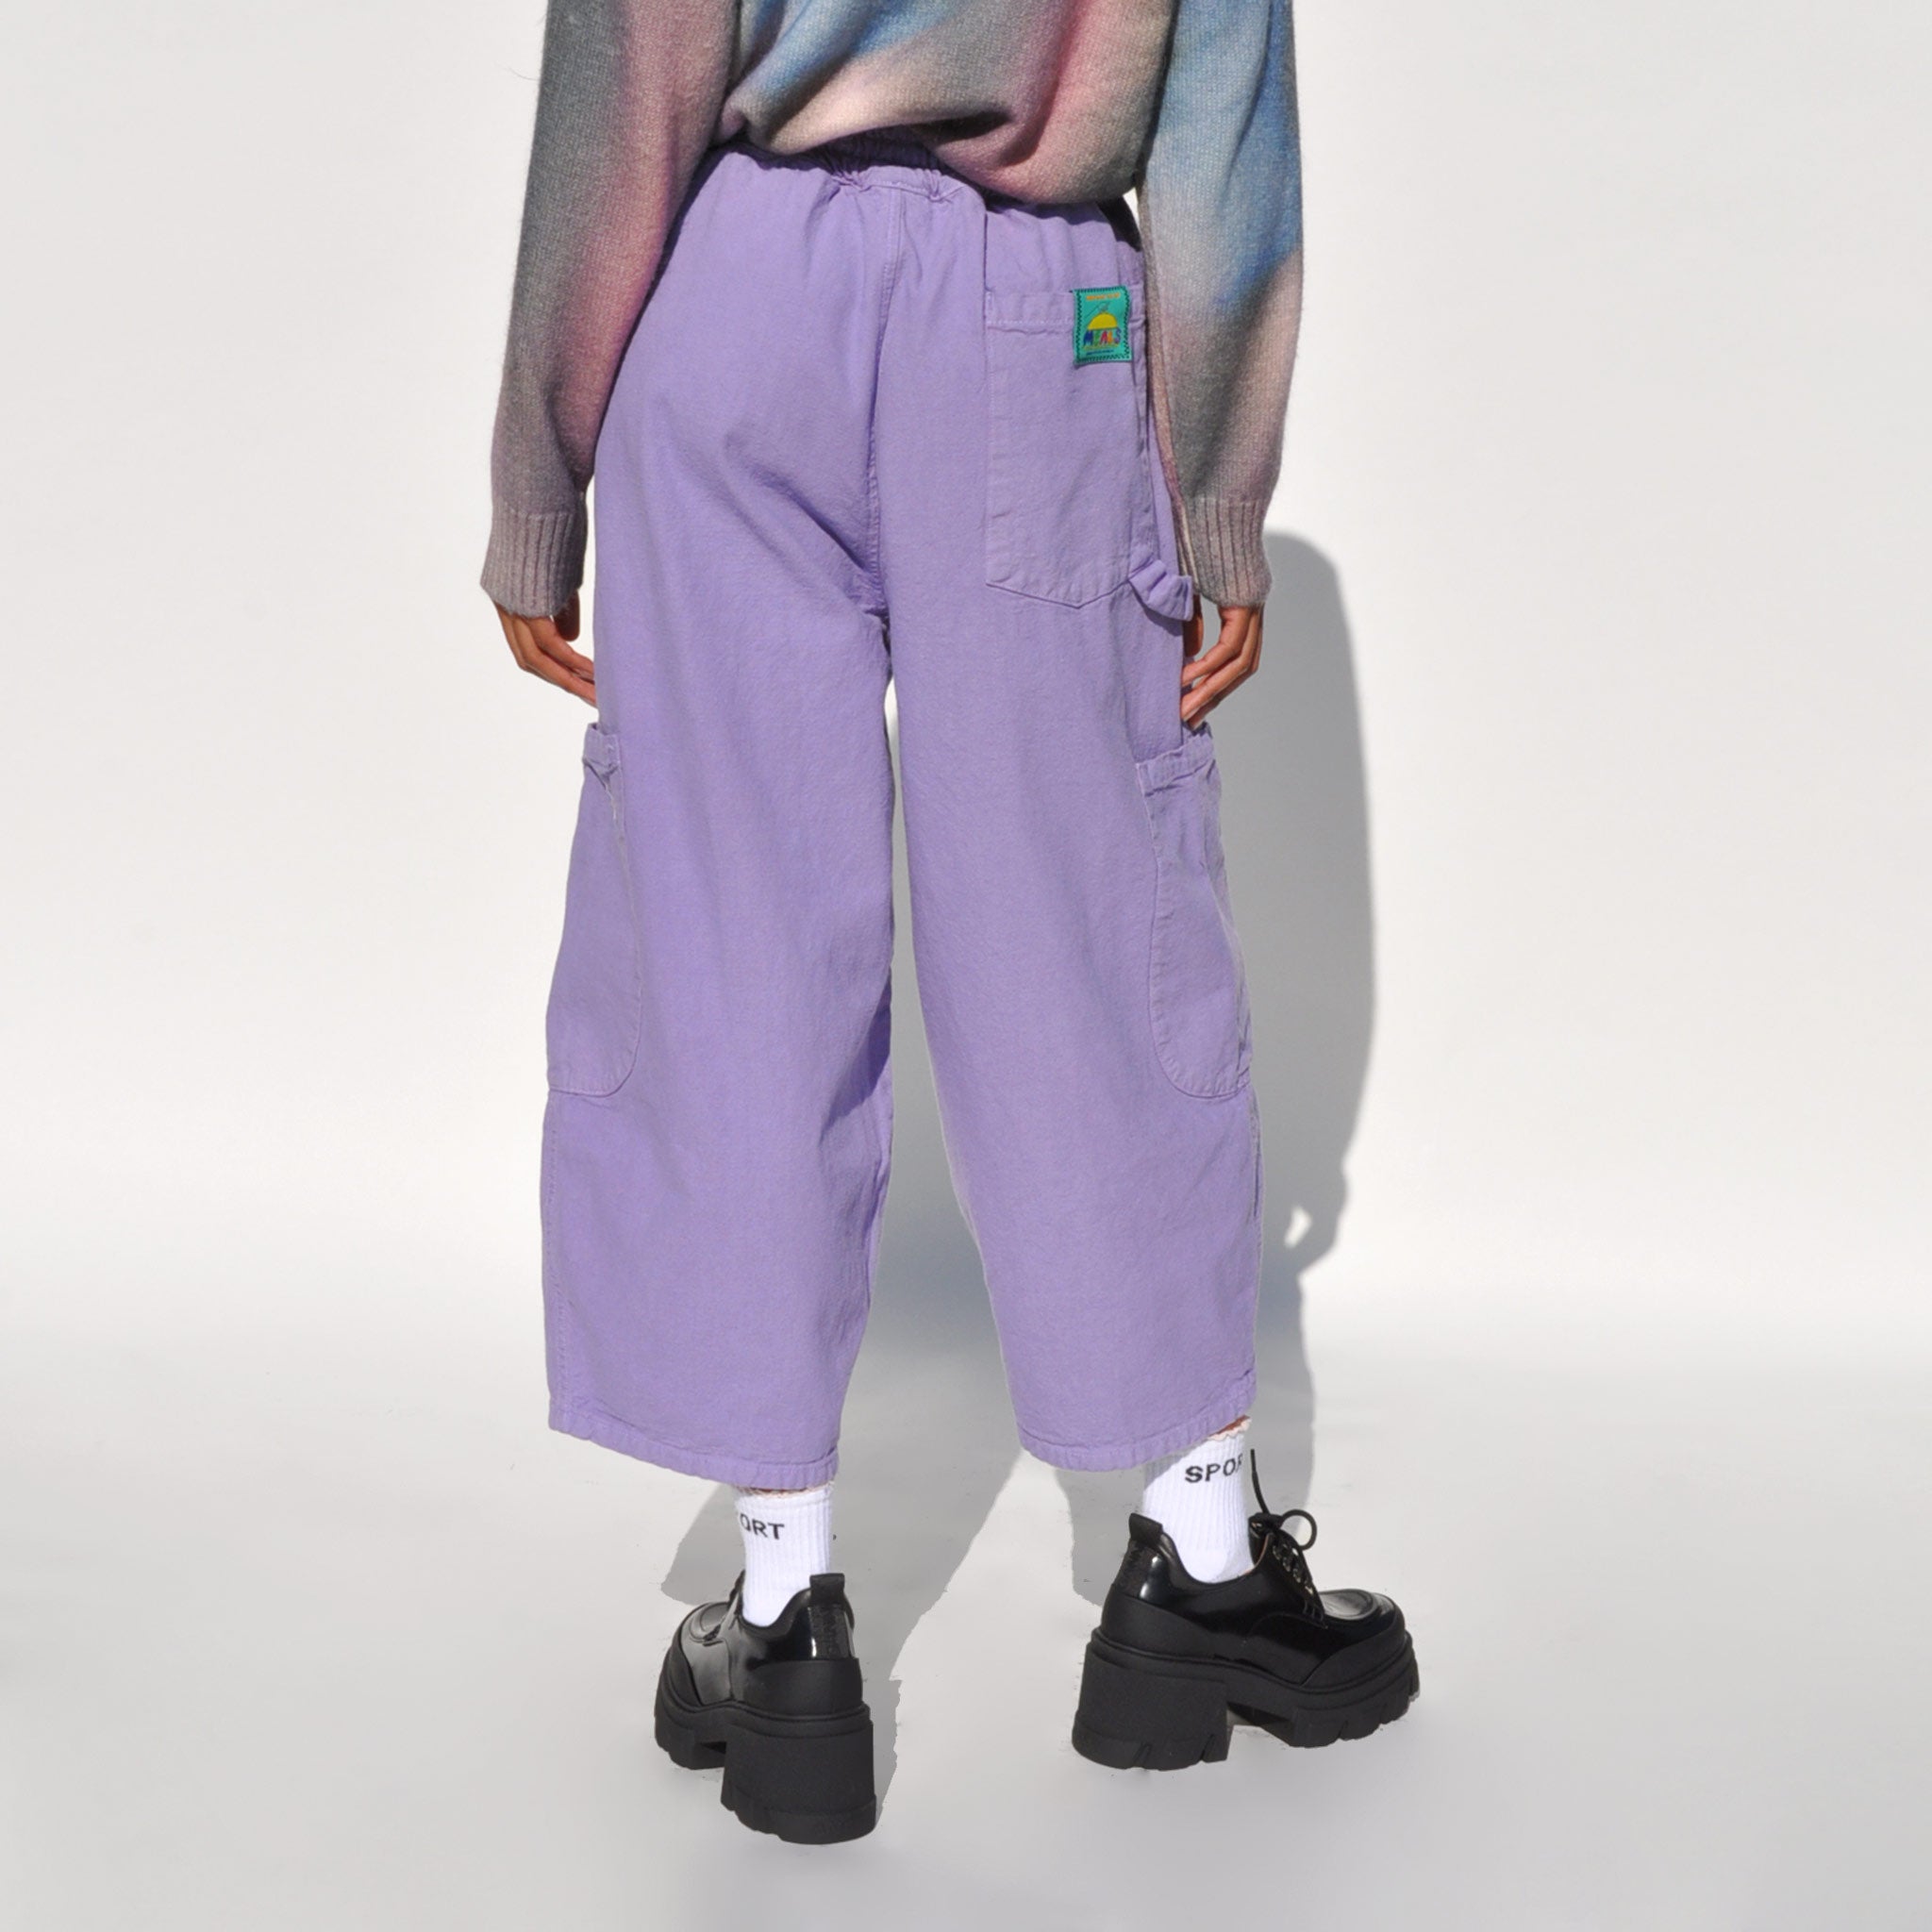 Back photo of a model wearing the chef pants in lavender by Meals.